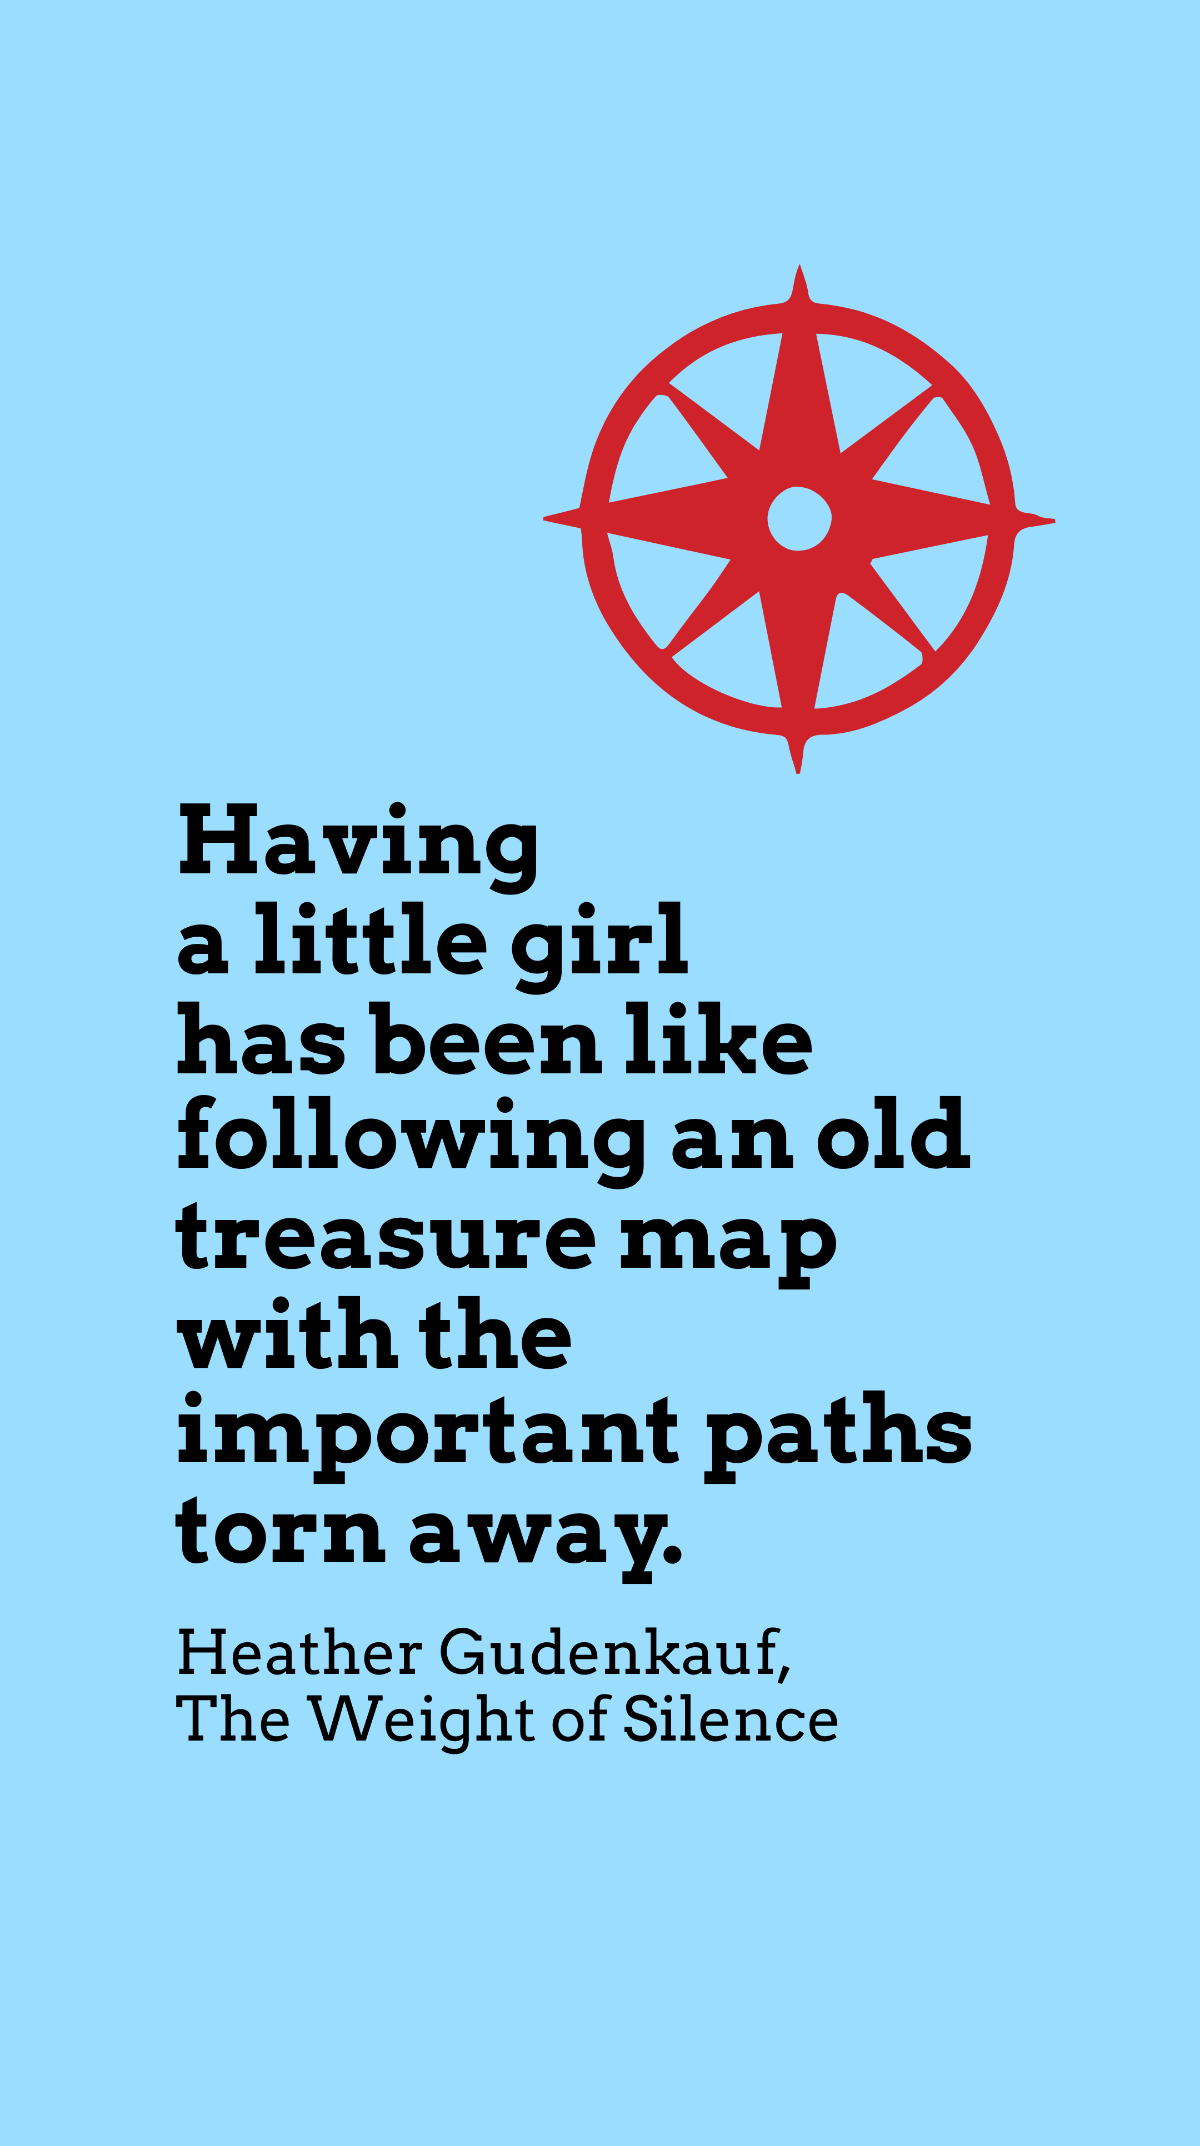 Free Heather Gudenkauf, The Weight of Silence - Having a little girl has been like following an old treasure map with the important paths torn away. Template